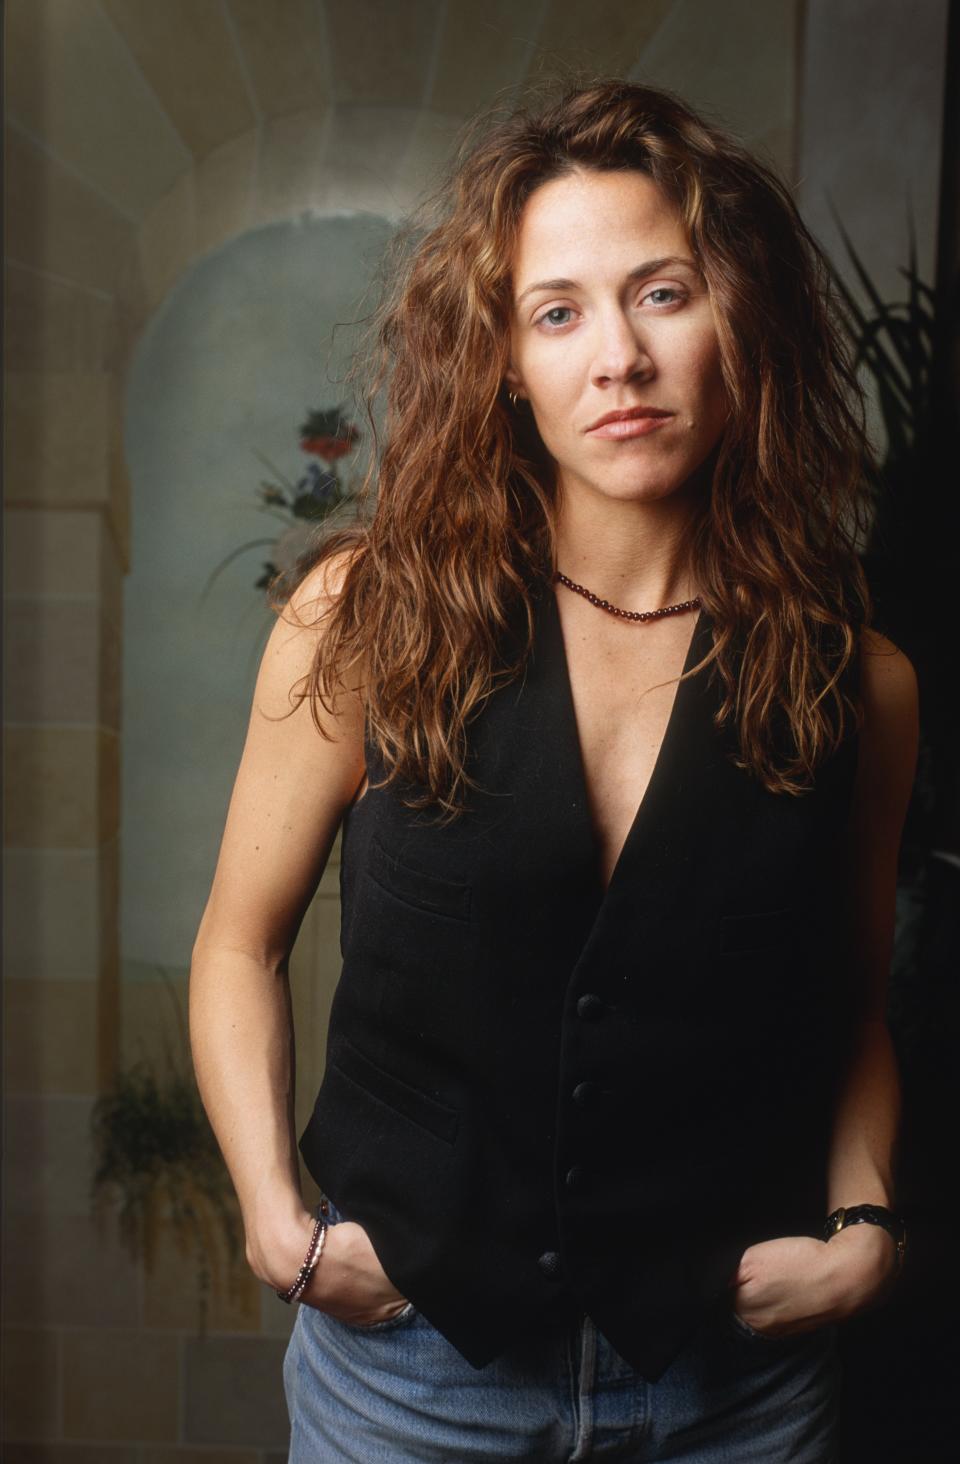 Sheryl Crow in 1994. (Photo: Gie Knaeps/Getty Images)